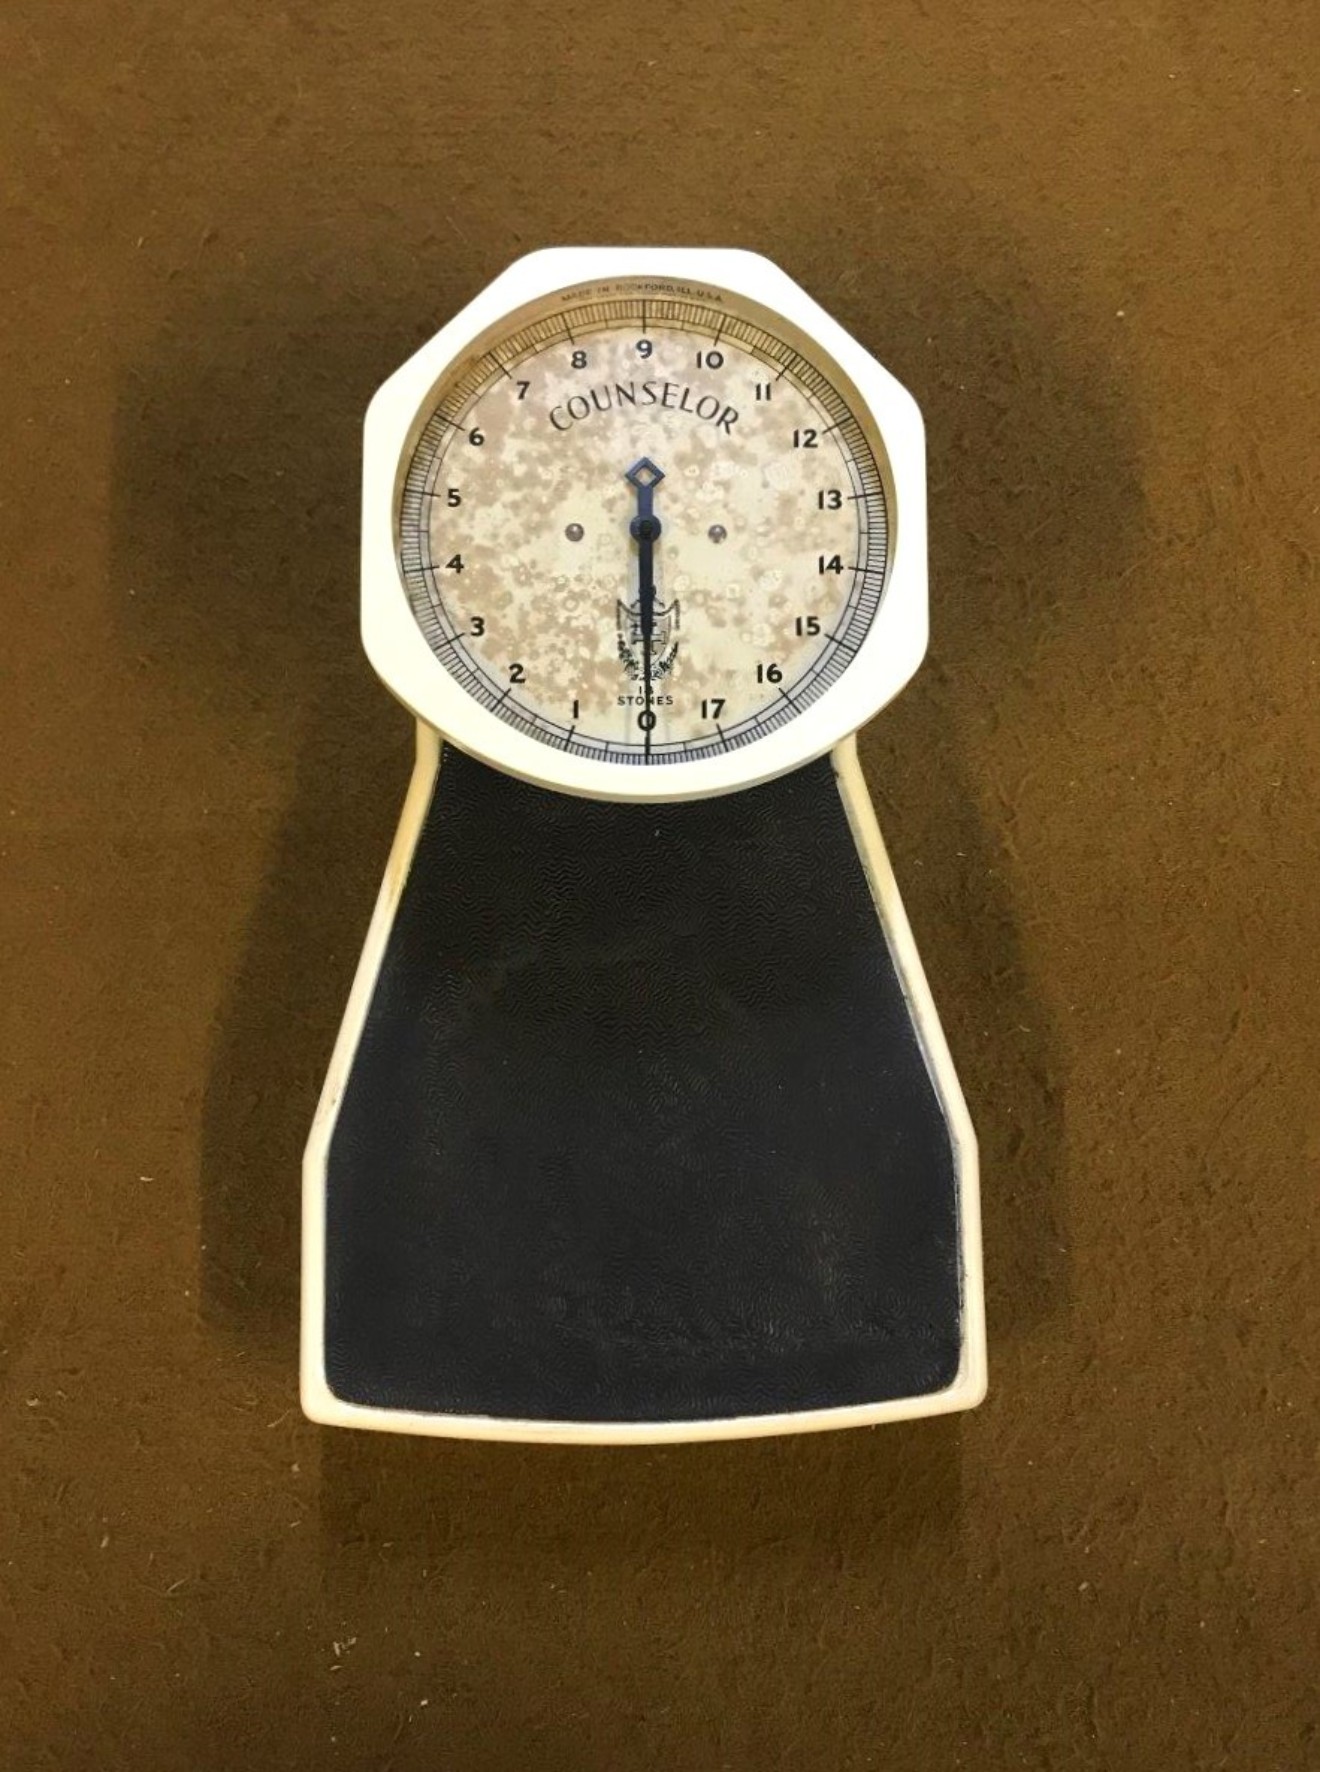 Antique American Bathroom Scales "Counselor" by The Brearly Co Rockford Illinois USA